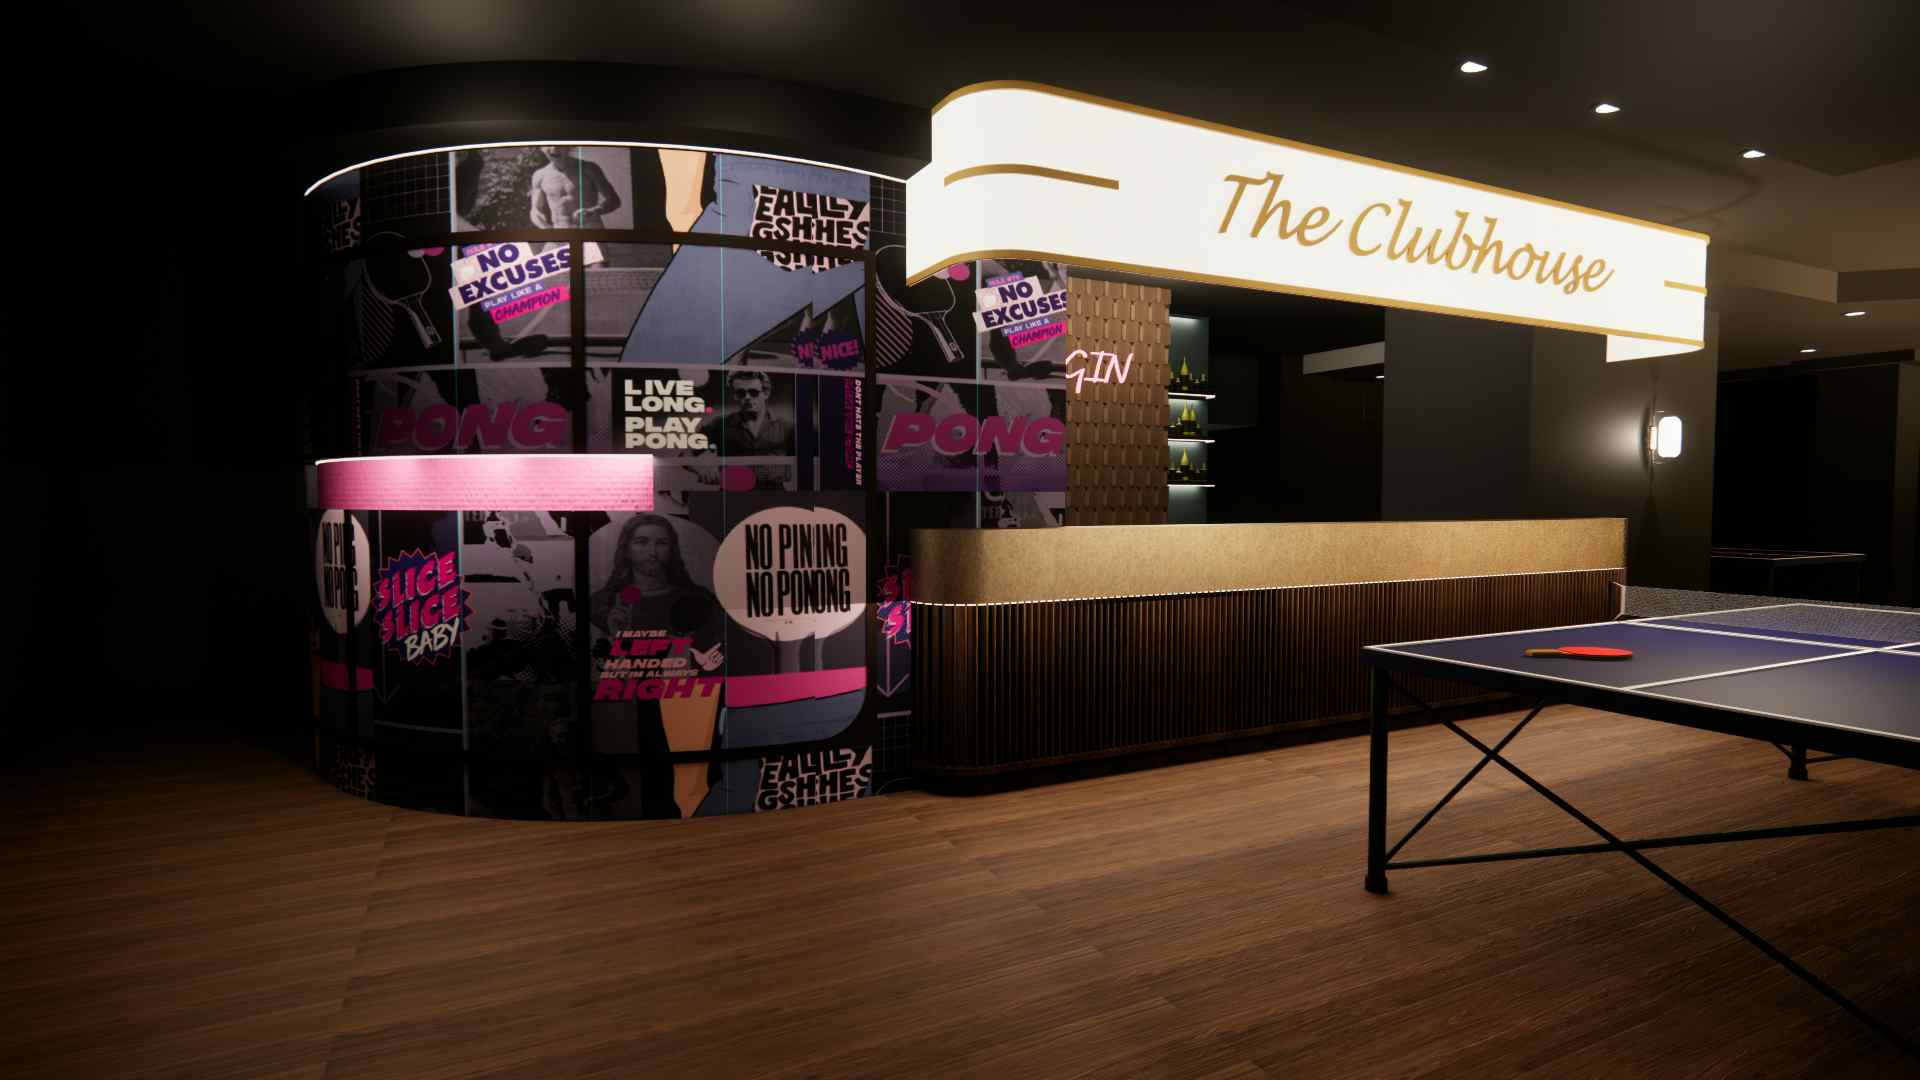 The Clubhouse , Ballers Clubhouse Adelaide